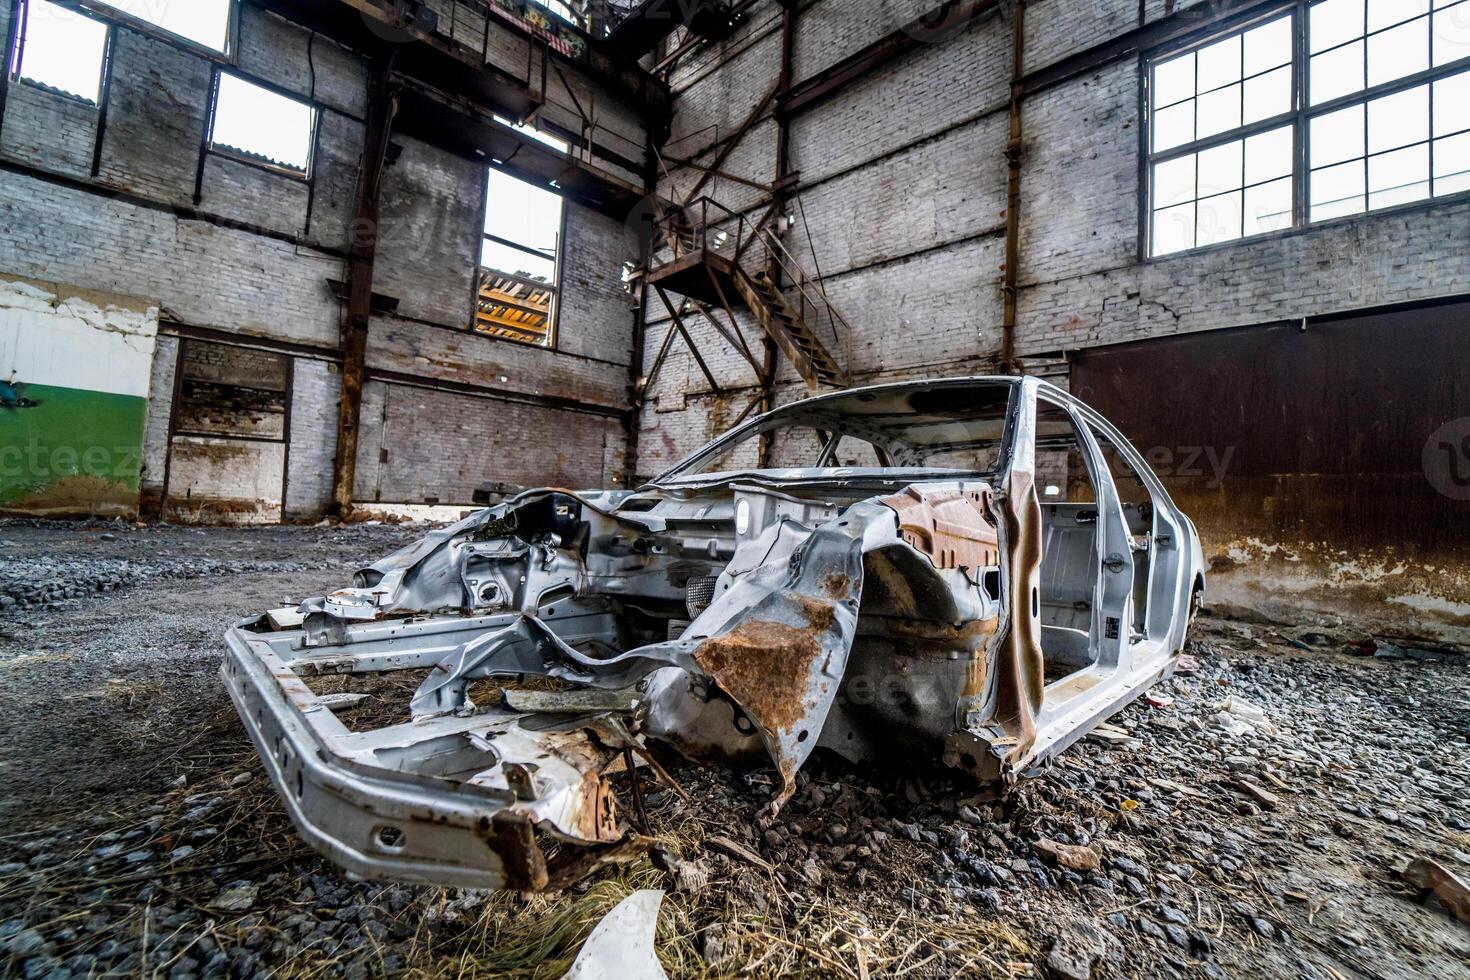 Abandoned in the empty building the old rusty cab of the passenger car. The frame of damaged car on the ground inside the big desolate factory photo